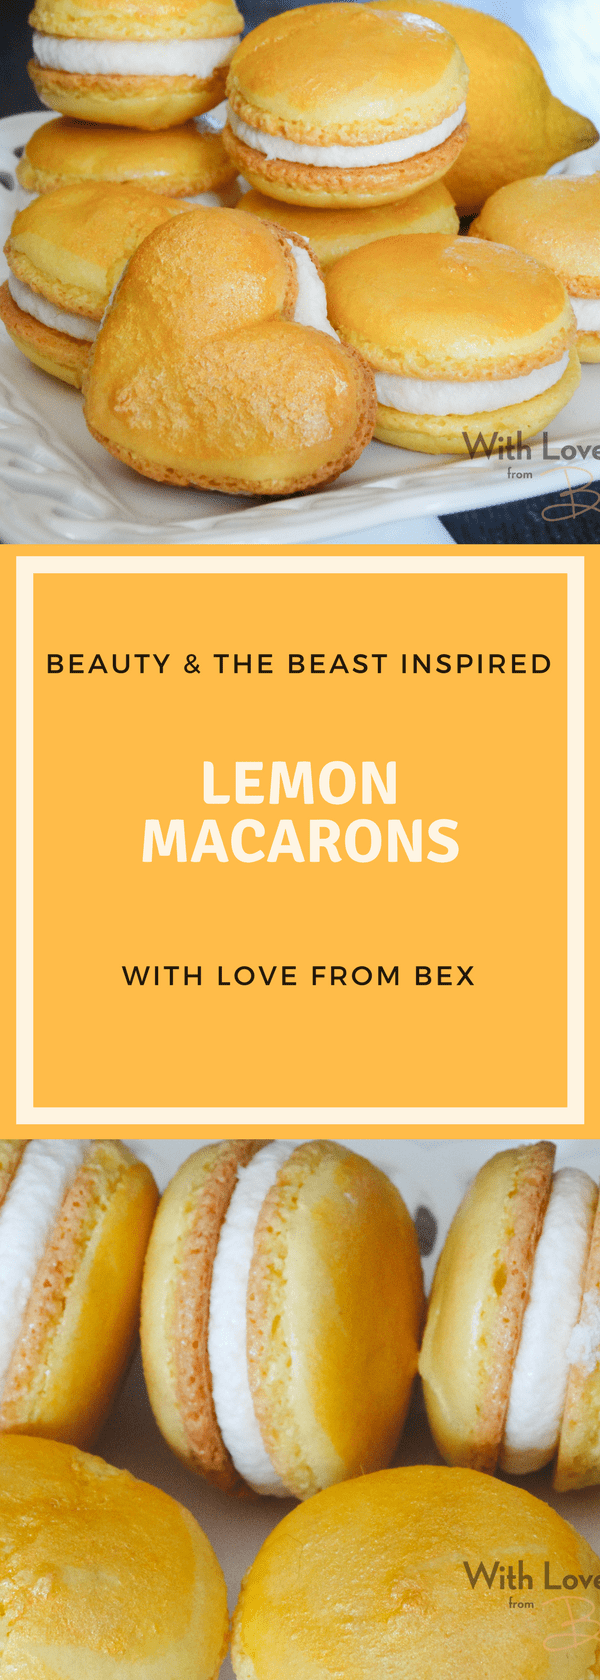 Bex Bakes: Beauty & the Beast Inspired Macarons